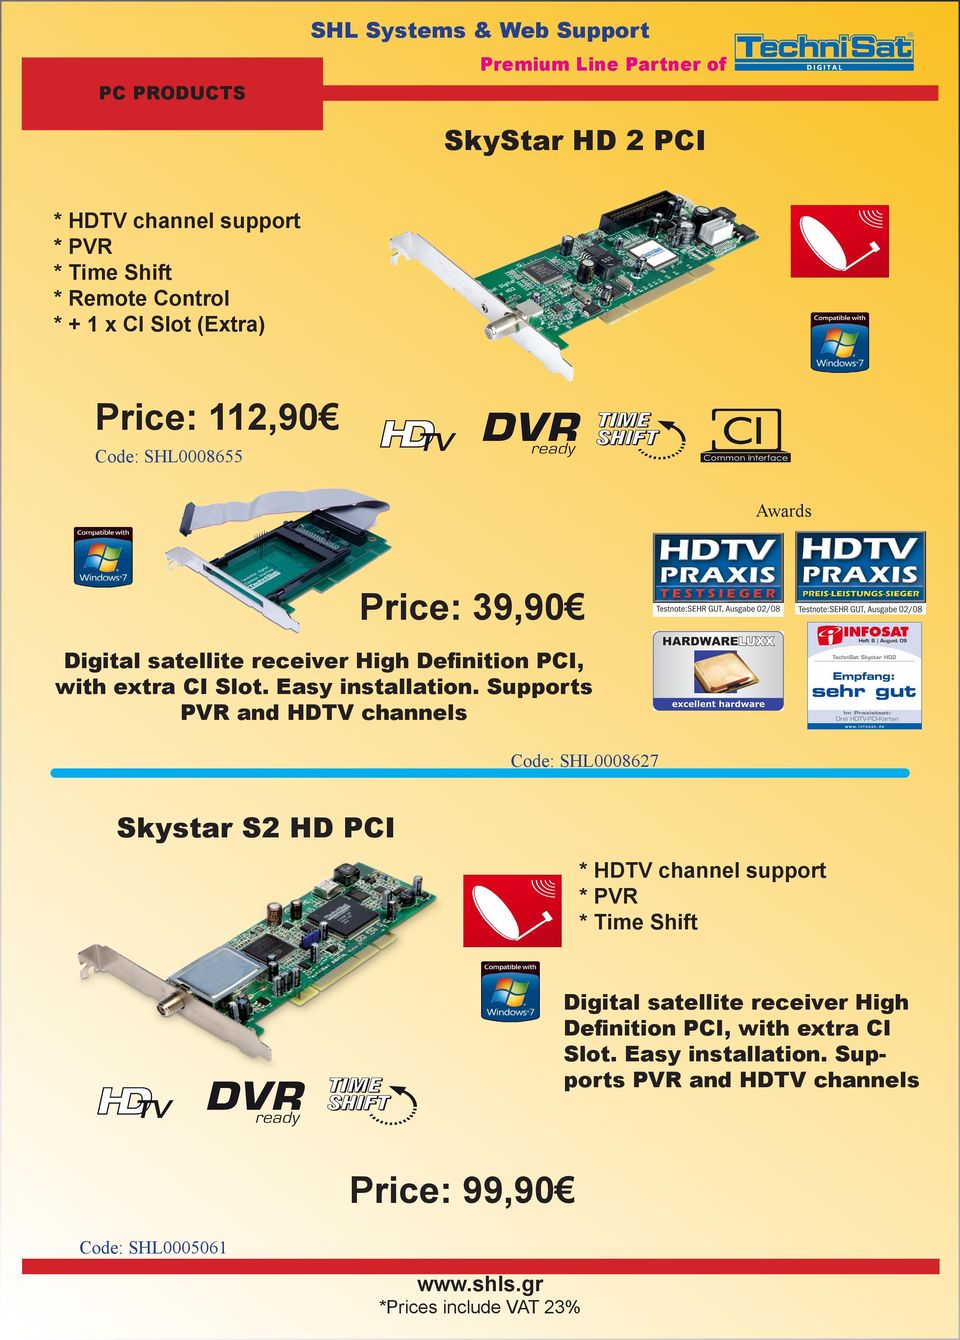 Supports PVR and HDTV channels Code: SHL0008627 Skystar S2 HD PCI * HDTV channel support * PVR * Time Shift Digital